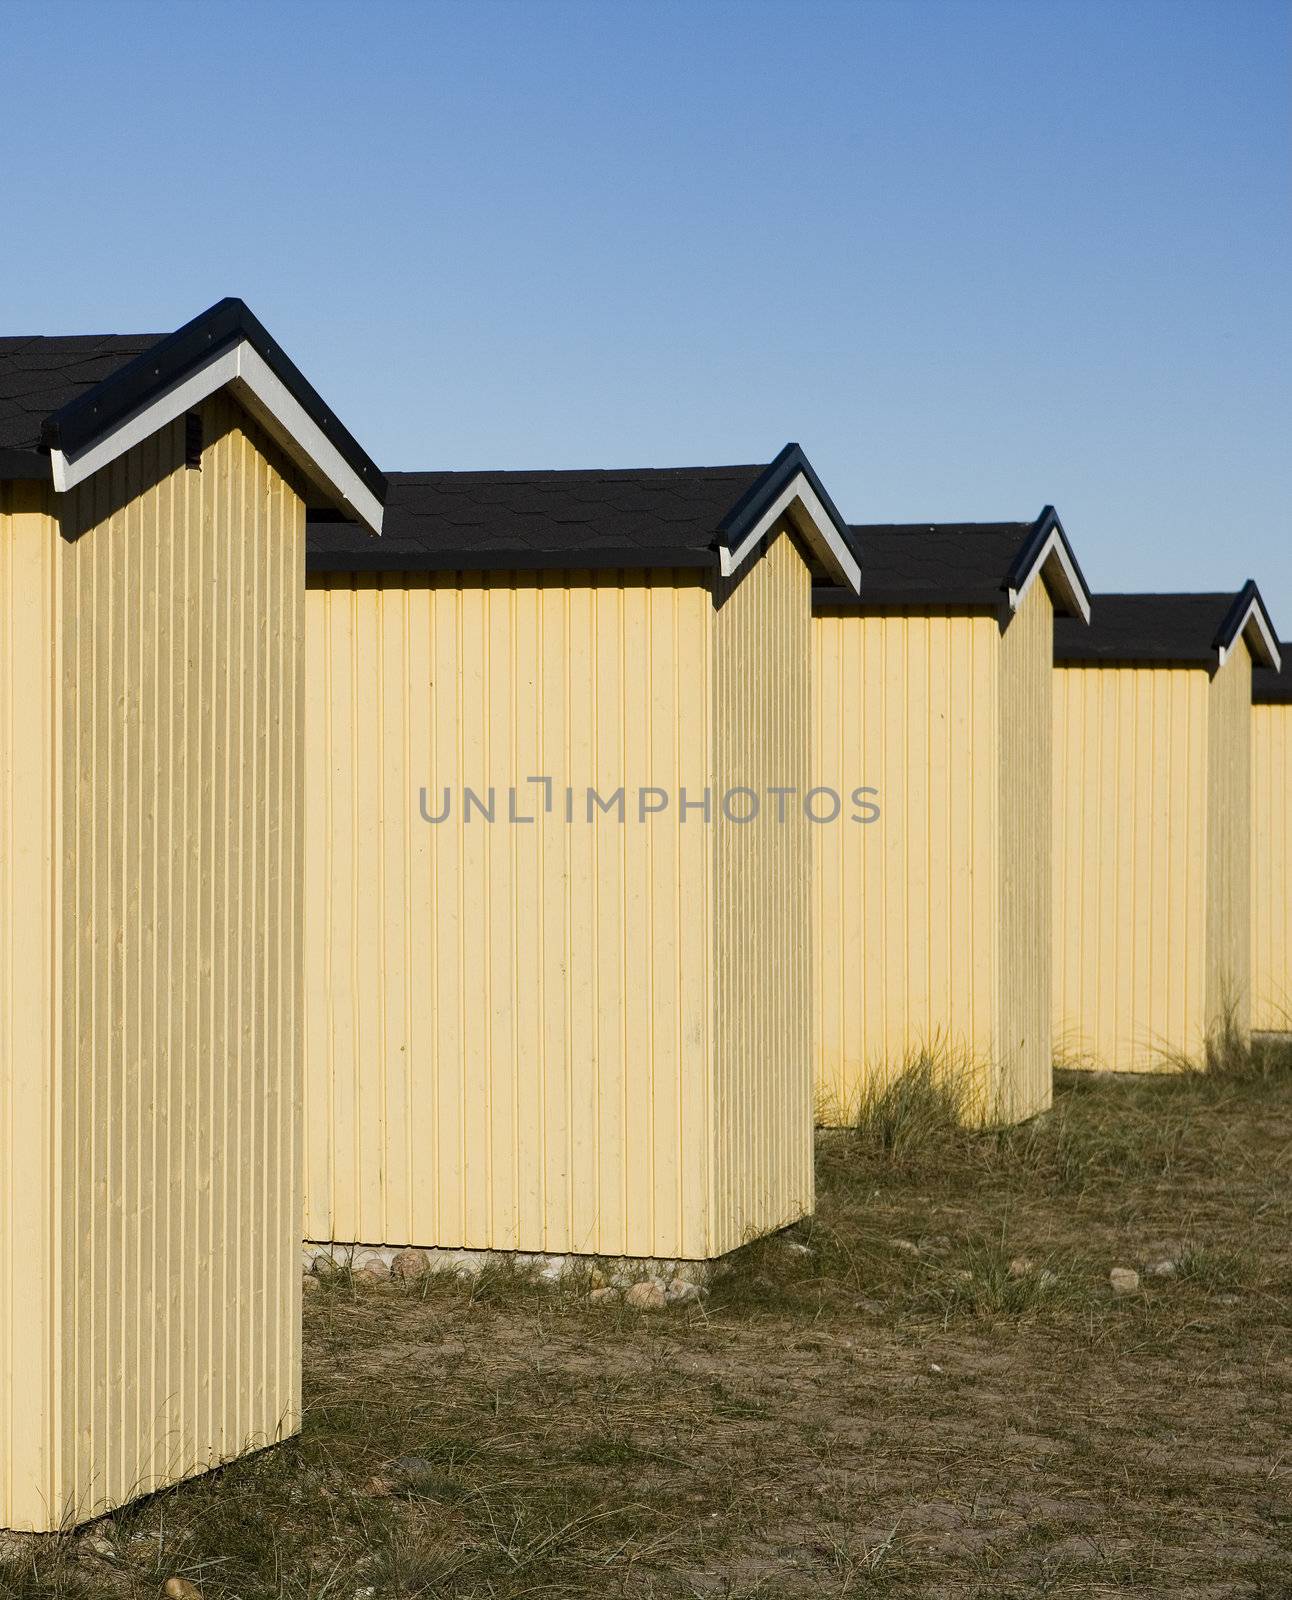 Row of boathouses on a sunny day